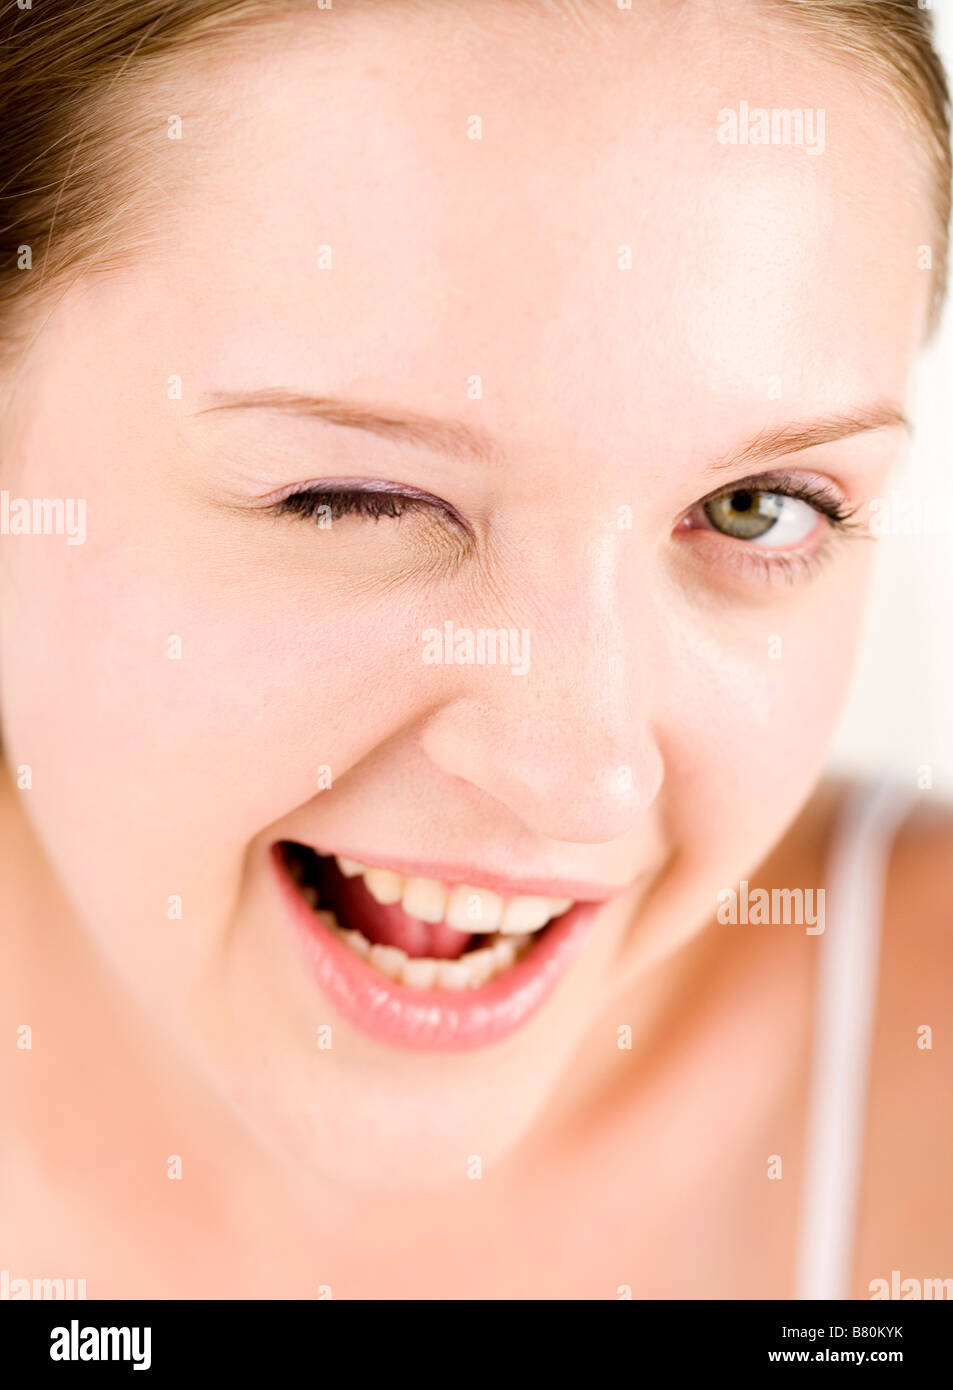 Young woman blinking her right eye and smiling Stock Photo